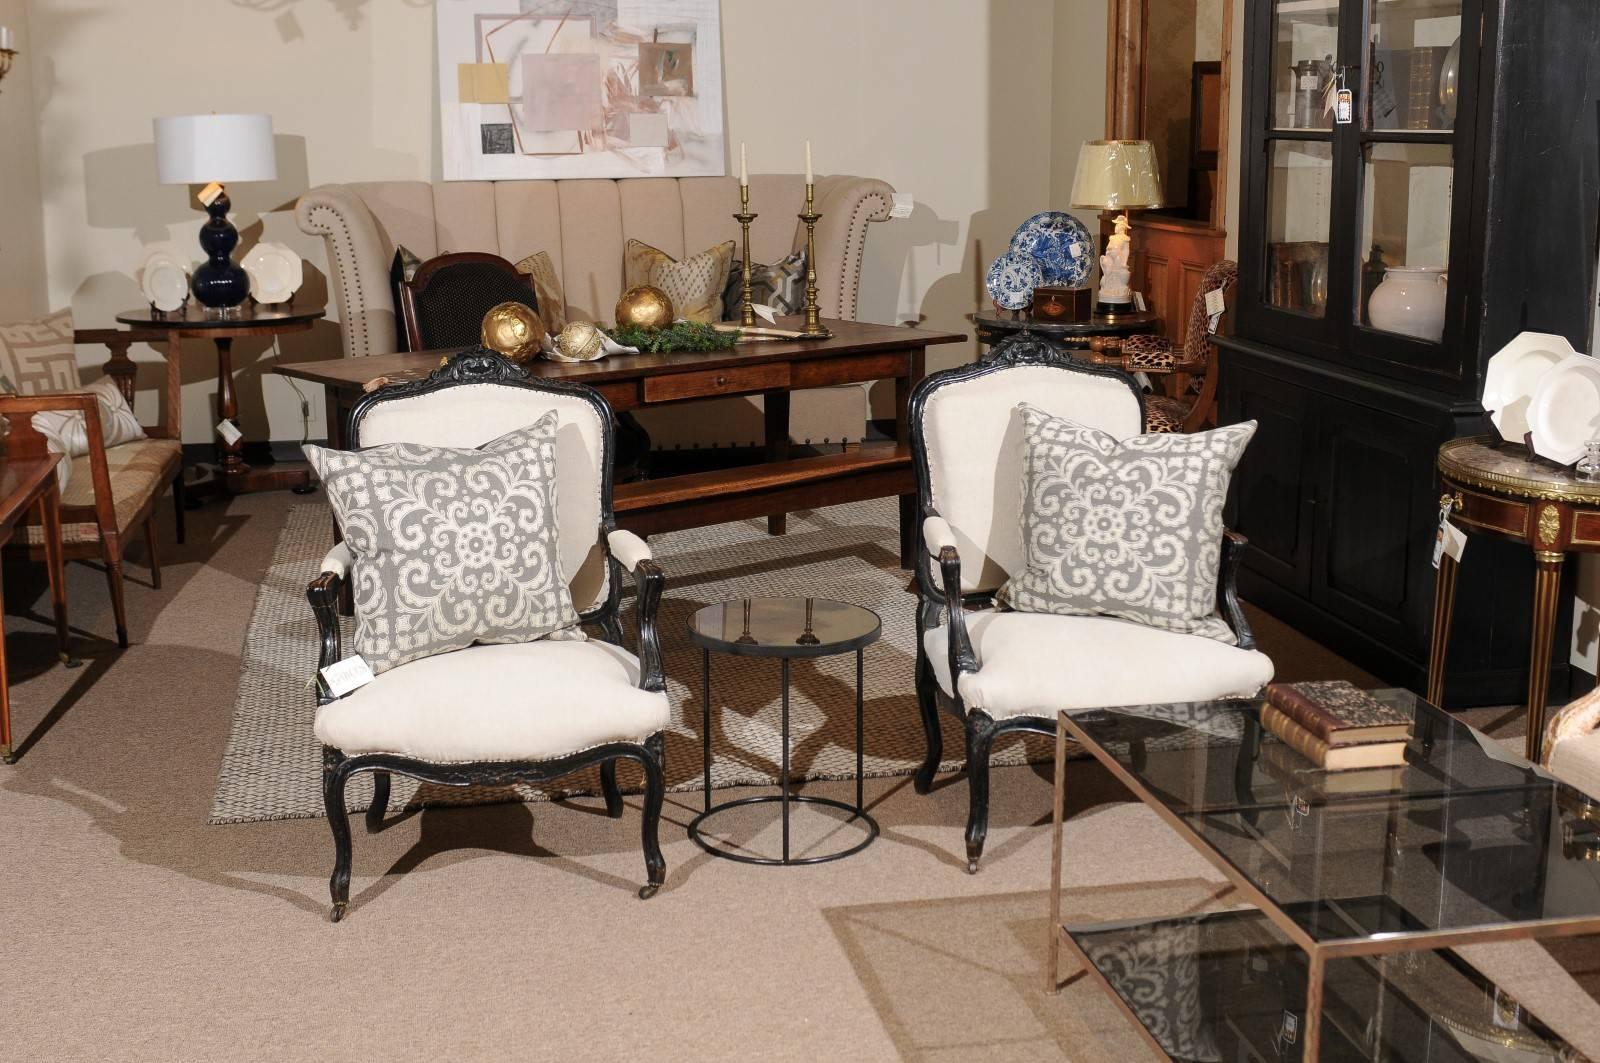 Pair of 19th century black Louis XVth style armchairs, circa 1880
A very handsome and graceful pair of Louis XVth armchairs with a painted black finish. The chair is quite comfortable and is nicely sized. It has a slightly distressed finish on the